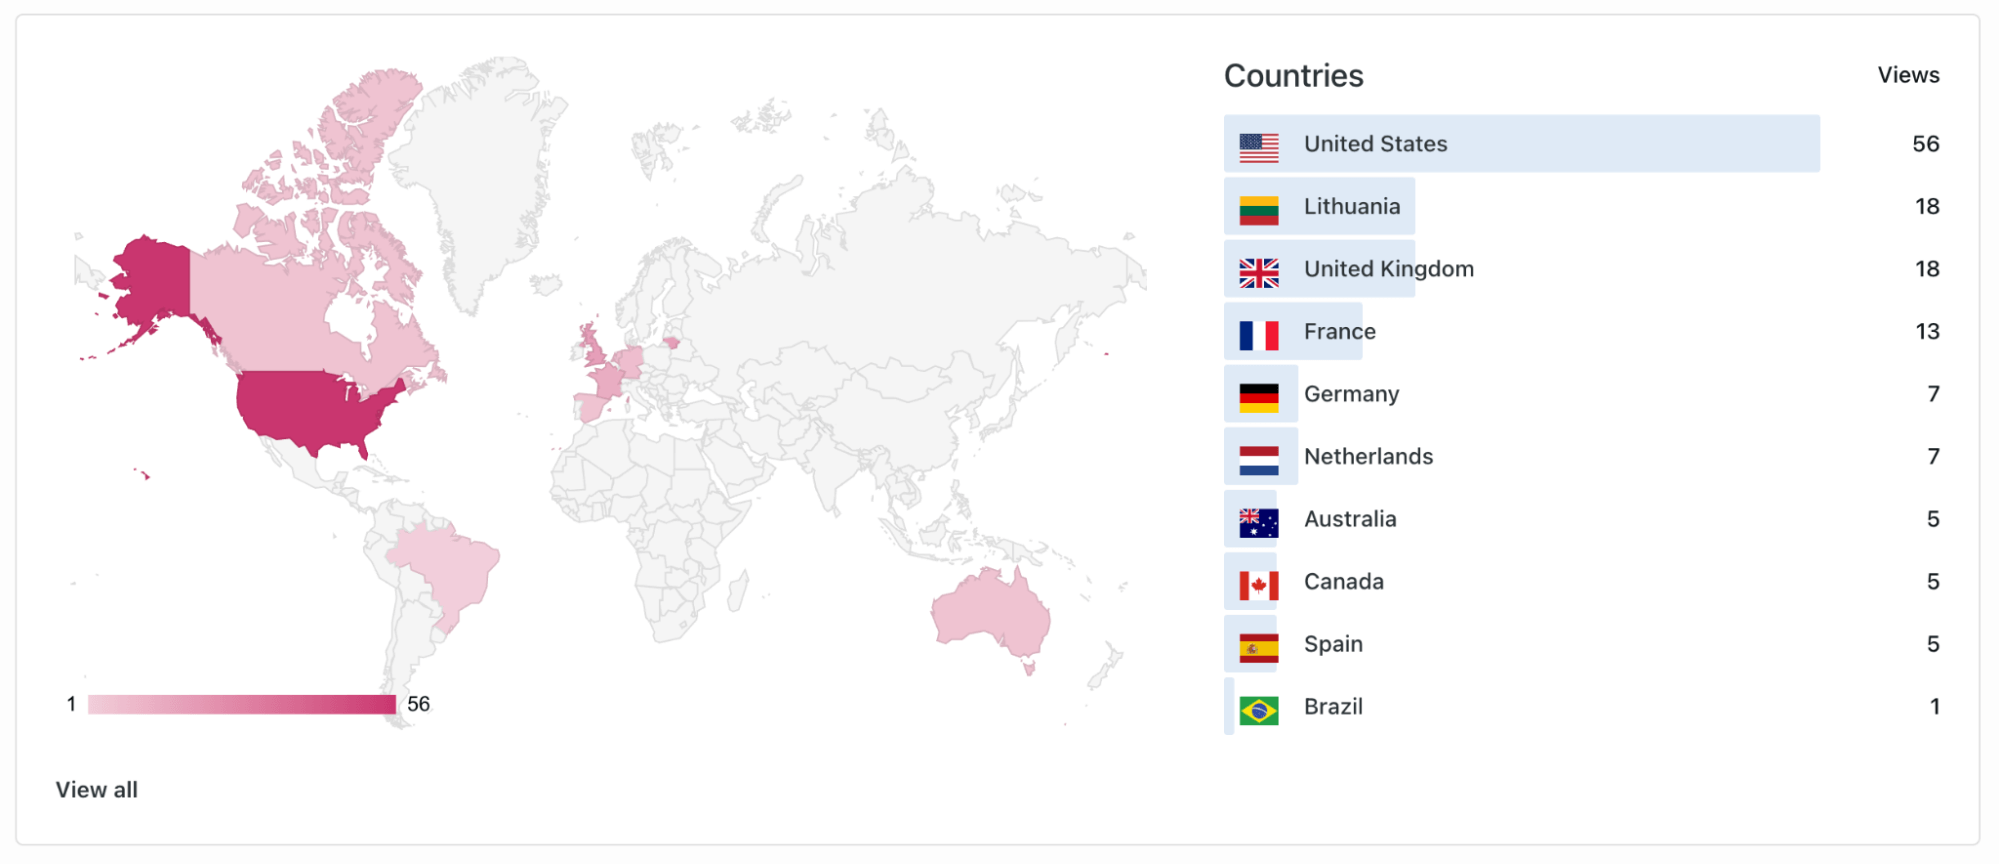 Table displaying views by country, next to a heatmap showing how visitors are split around the world.